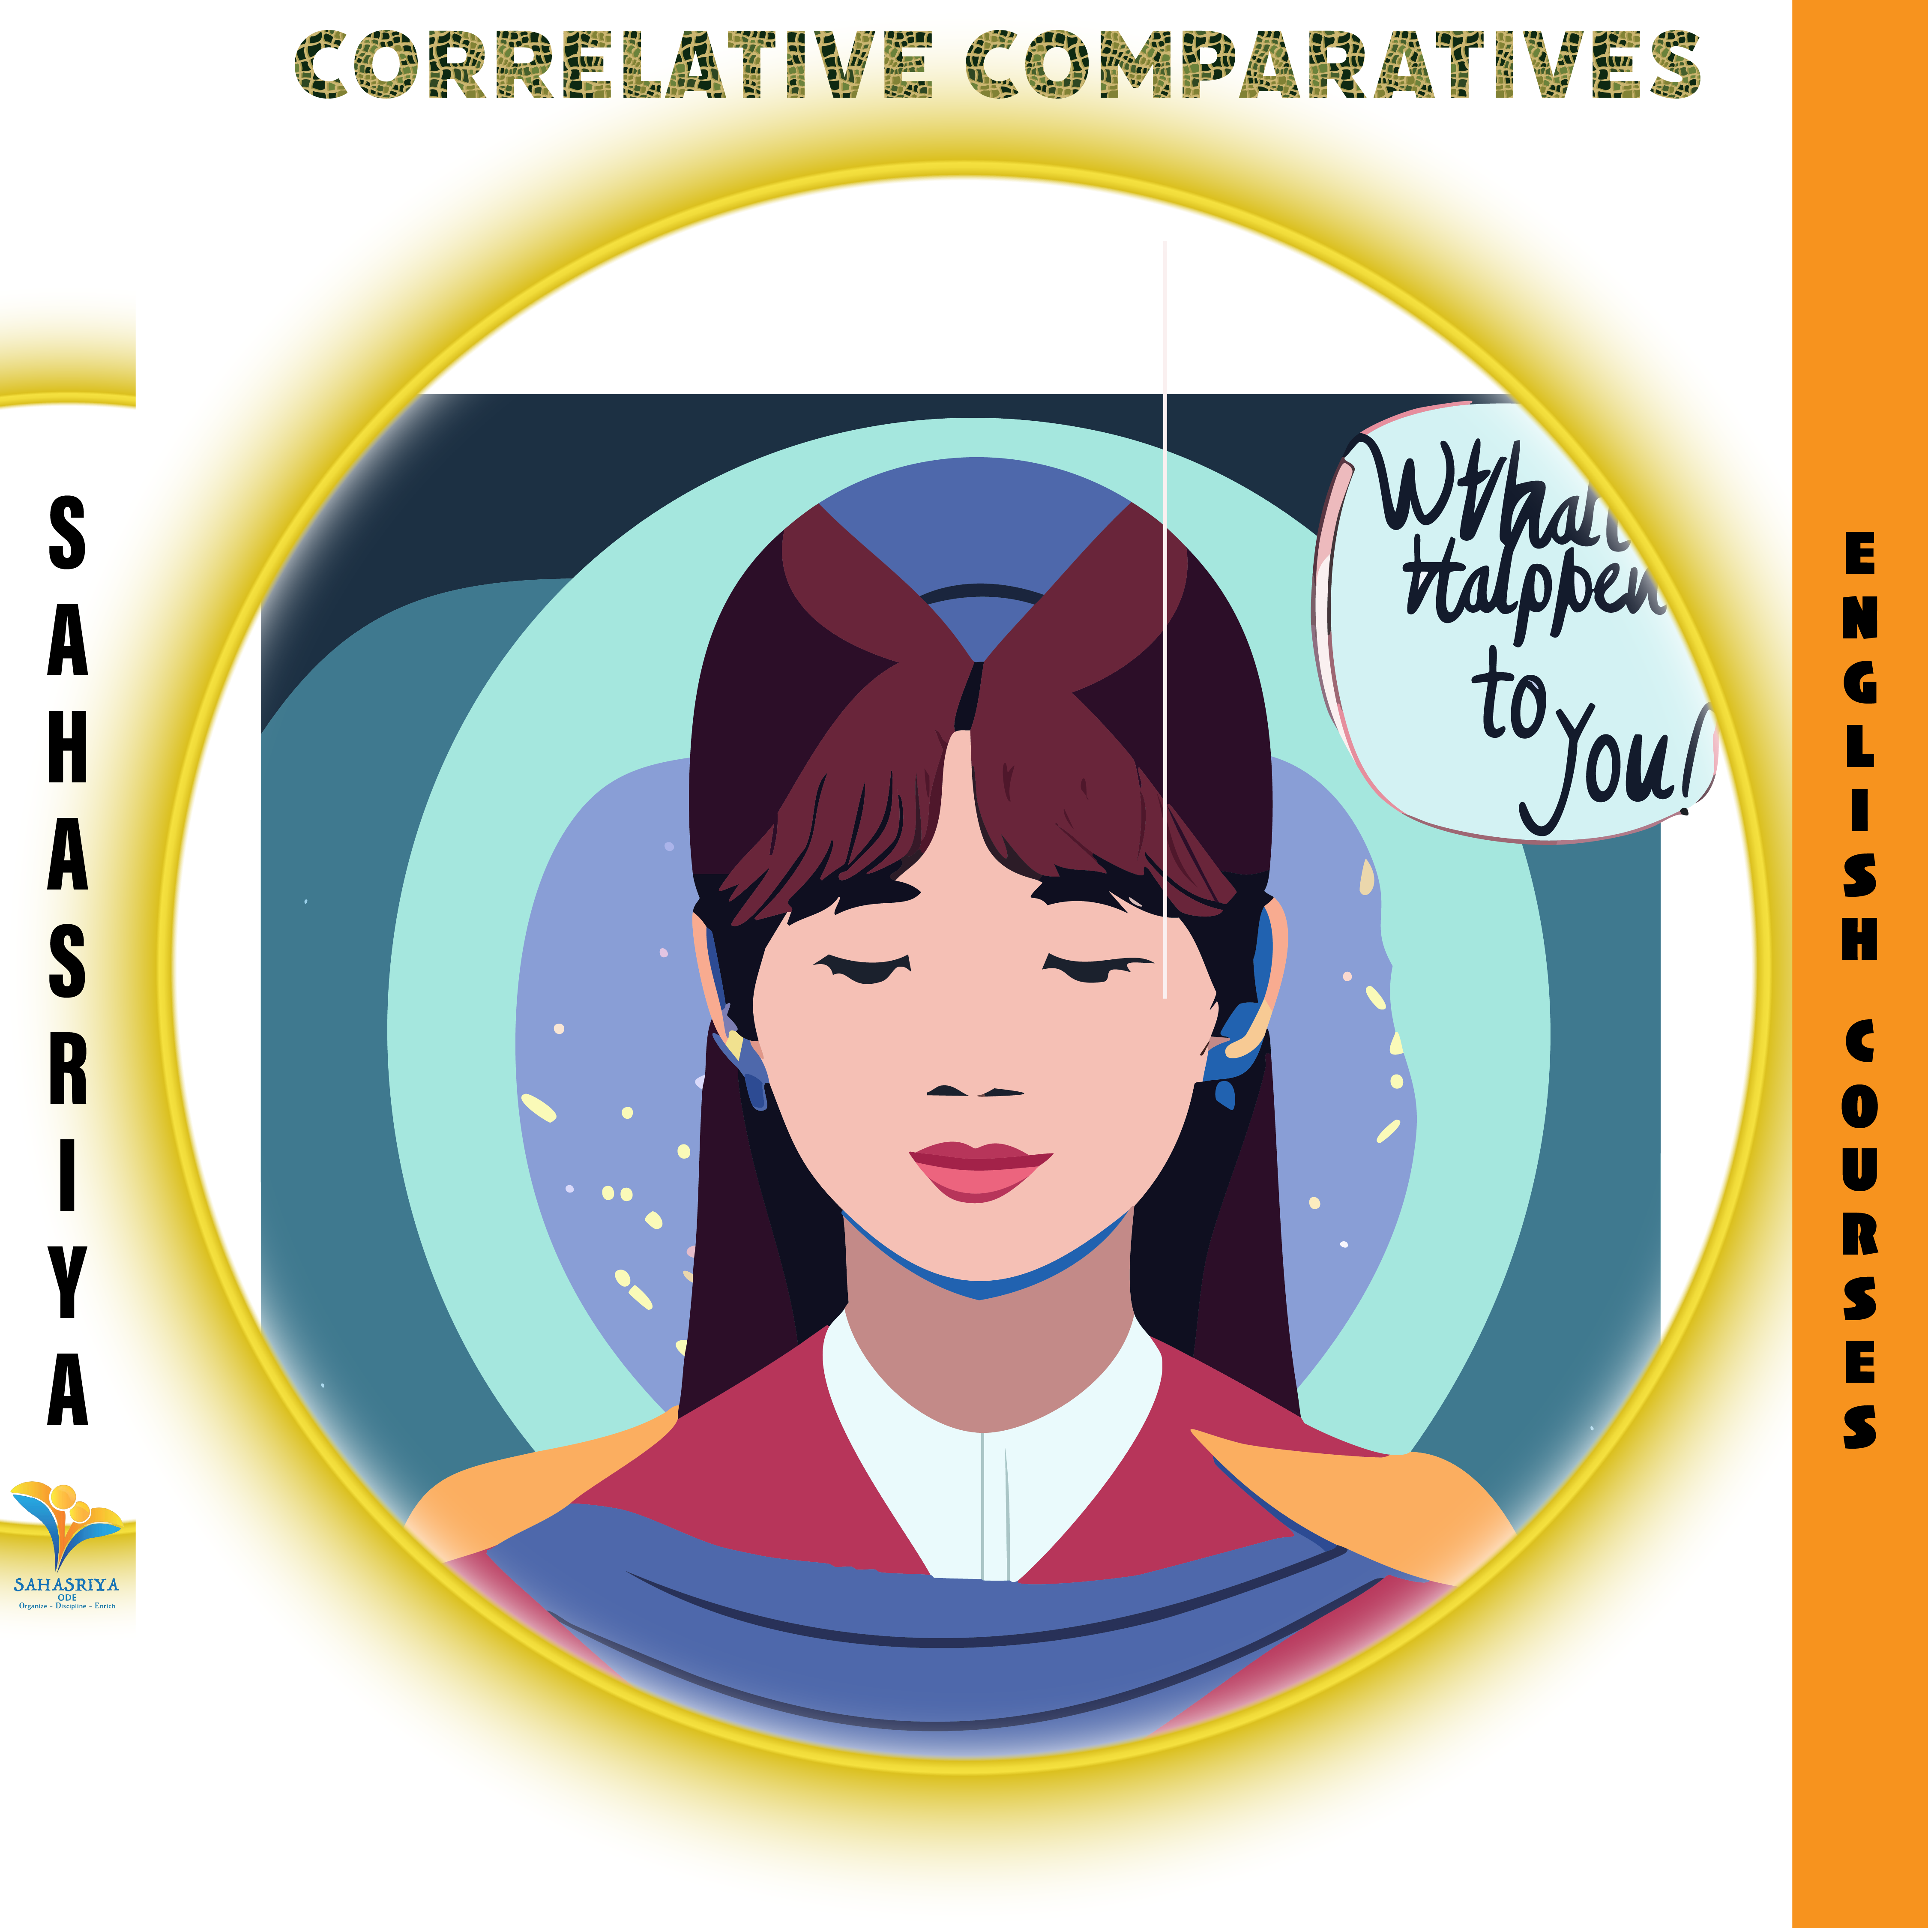 What happened to you? Why not understand correlative comparatives?